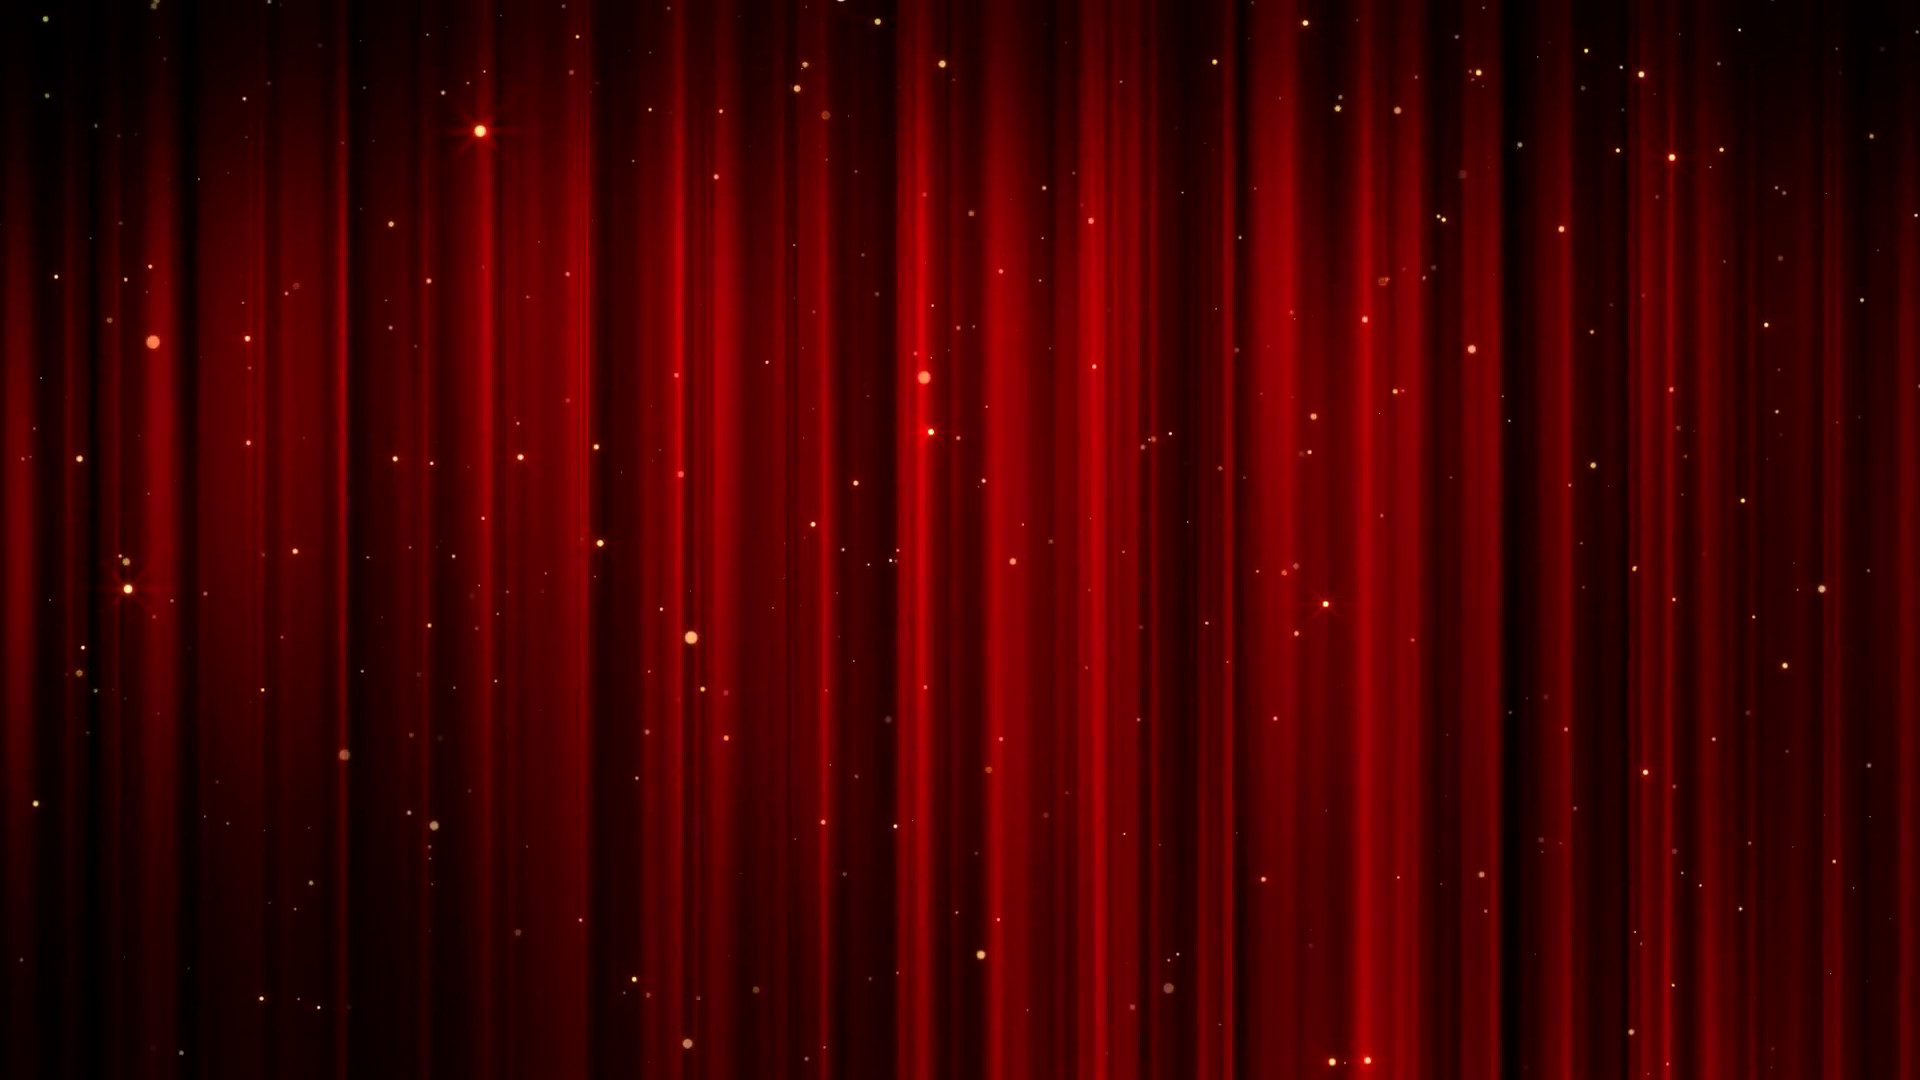 1920x1080 Full Size of Rugs:40 Tremendous Red Curtains Photo Ideas Red Curtain And  Stars Motion ...